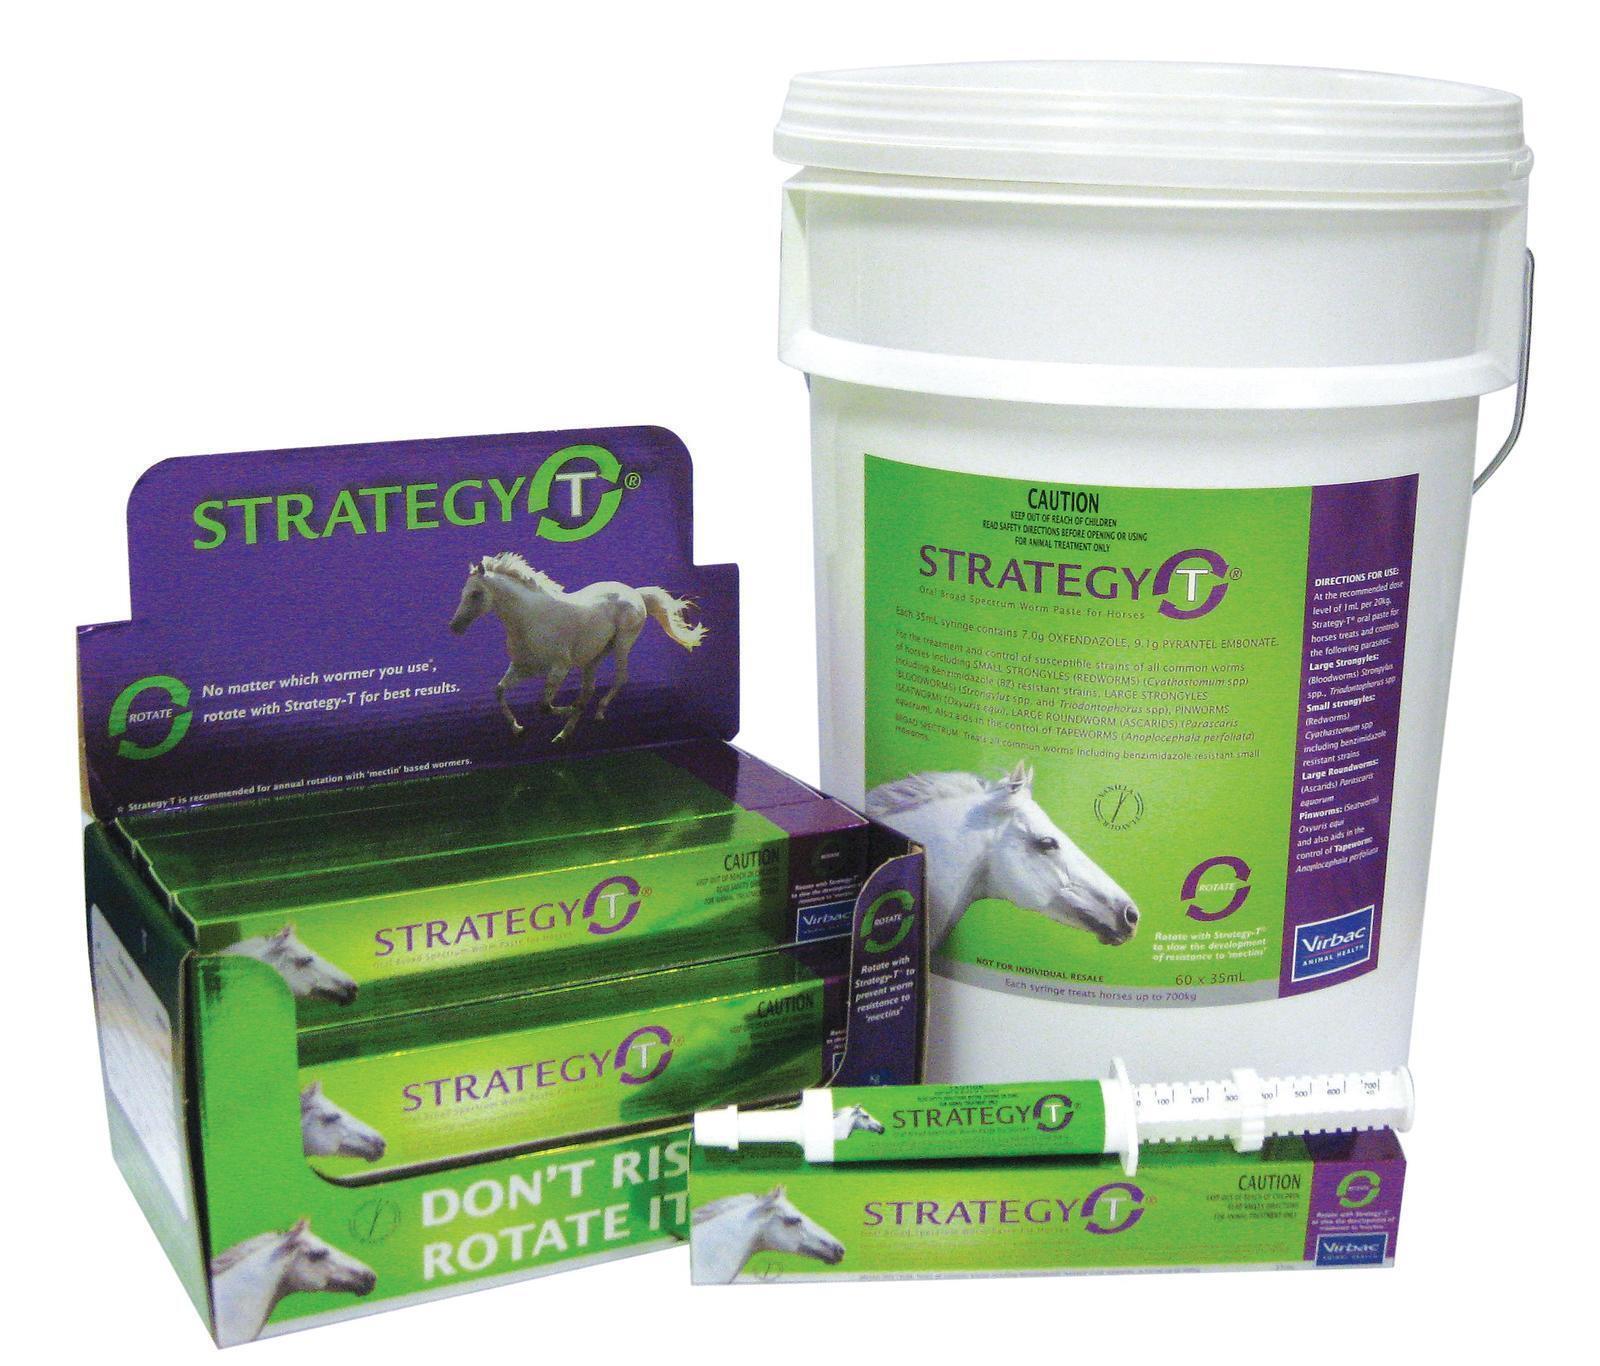 Virbac Strategy T Broadspectrum All Wormer for Horses 60 x 35ml